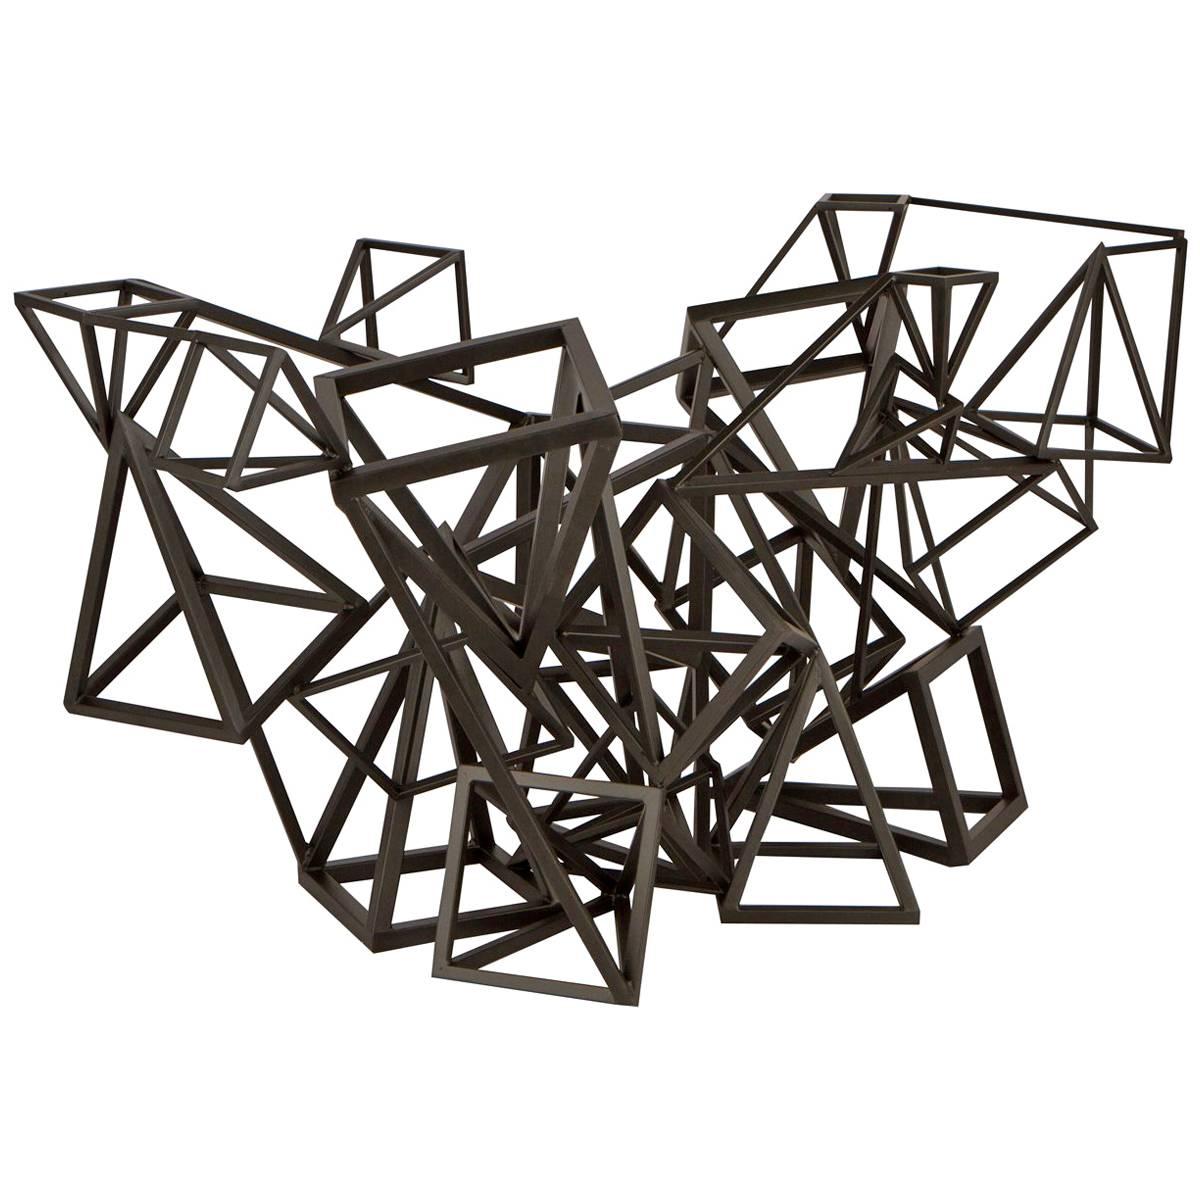 Incredible table in metal. Table was produced as a display piece for a store in Beverly Hills in the 1970s. Table is comprised of a myriad of geometric shapes fabricated together and can be used as either a dining table base or a console table.